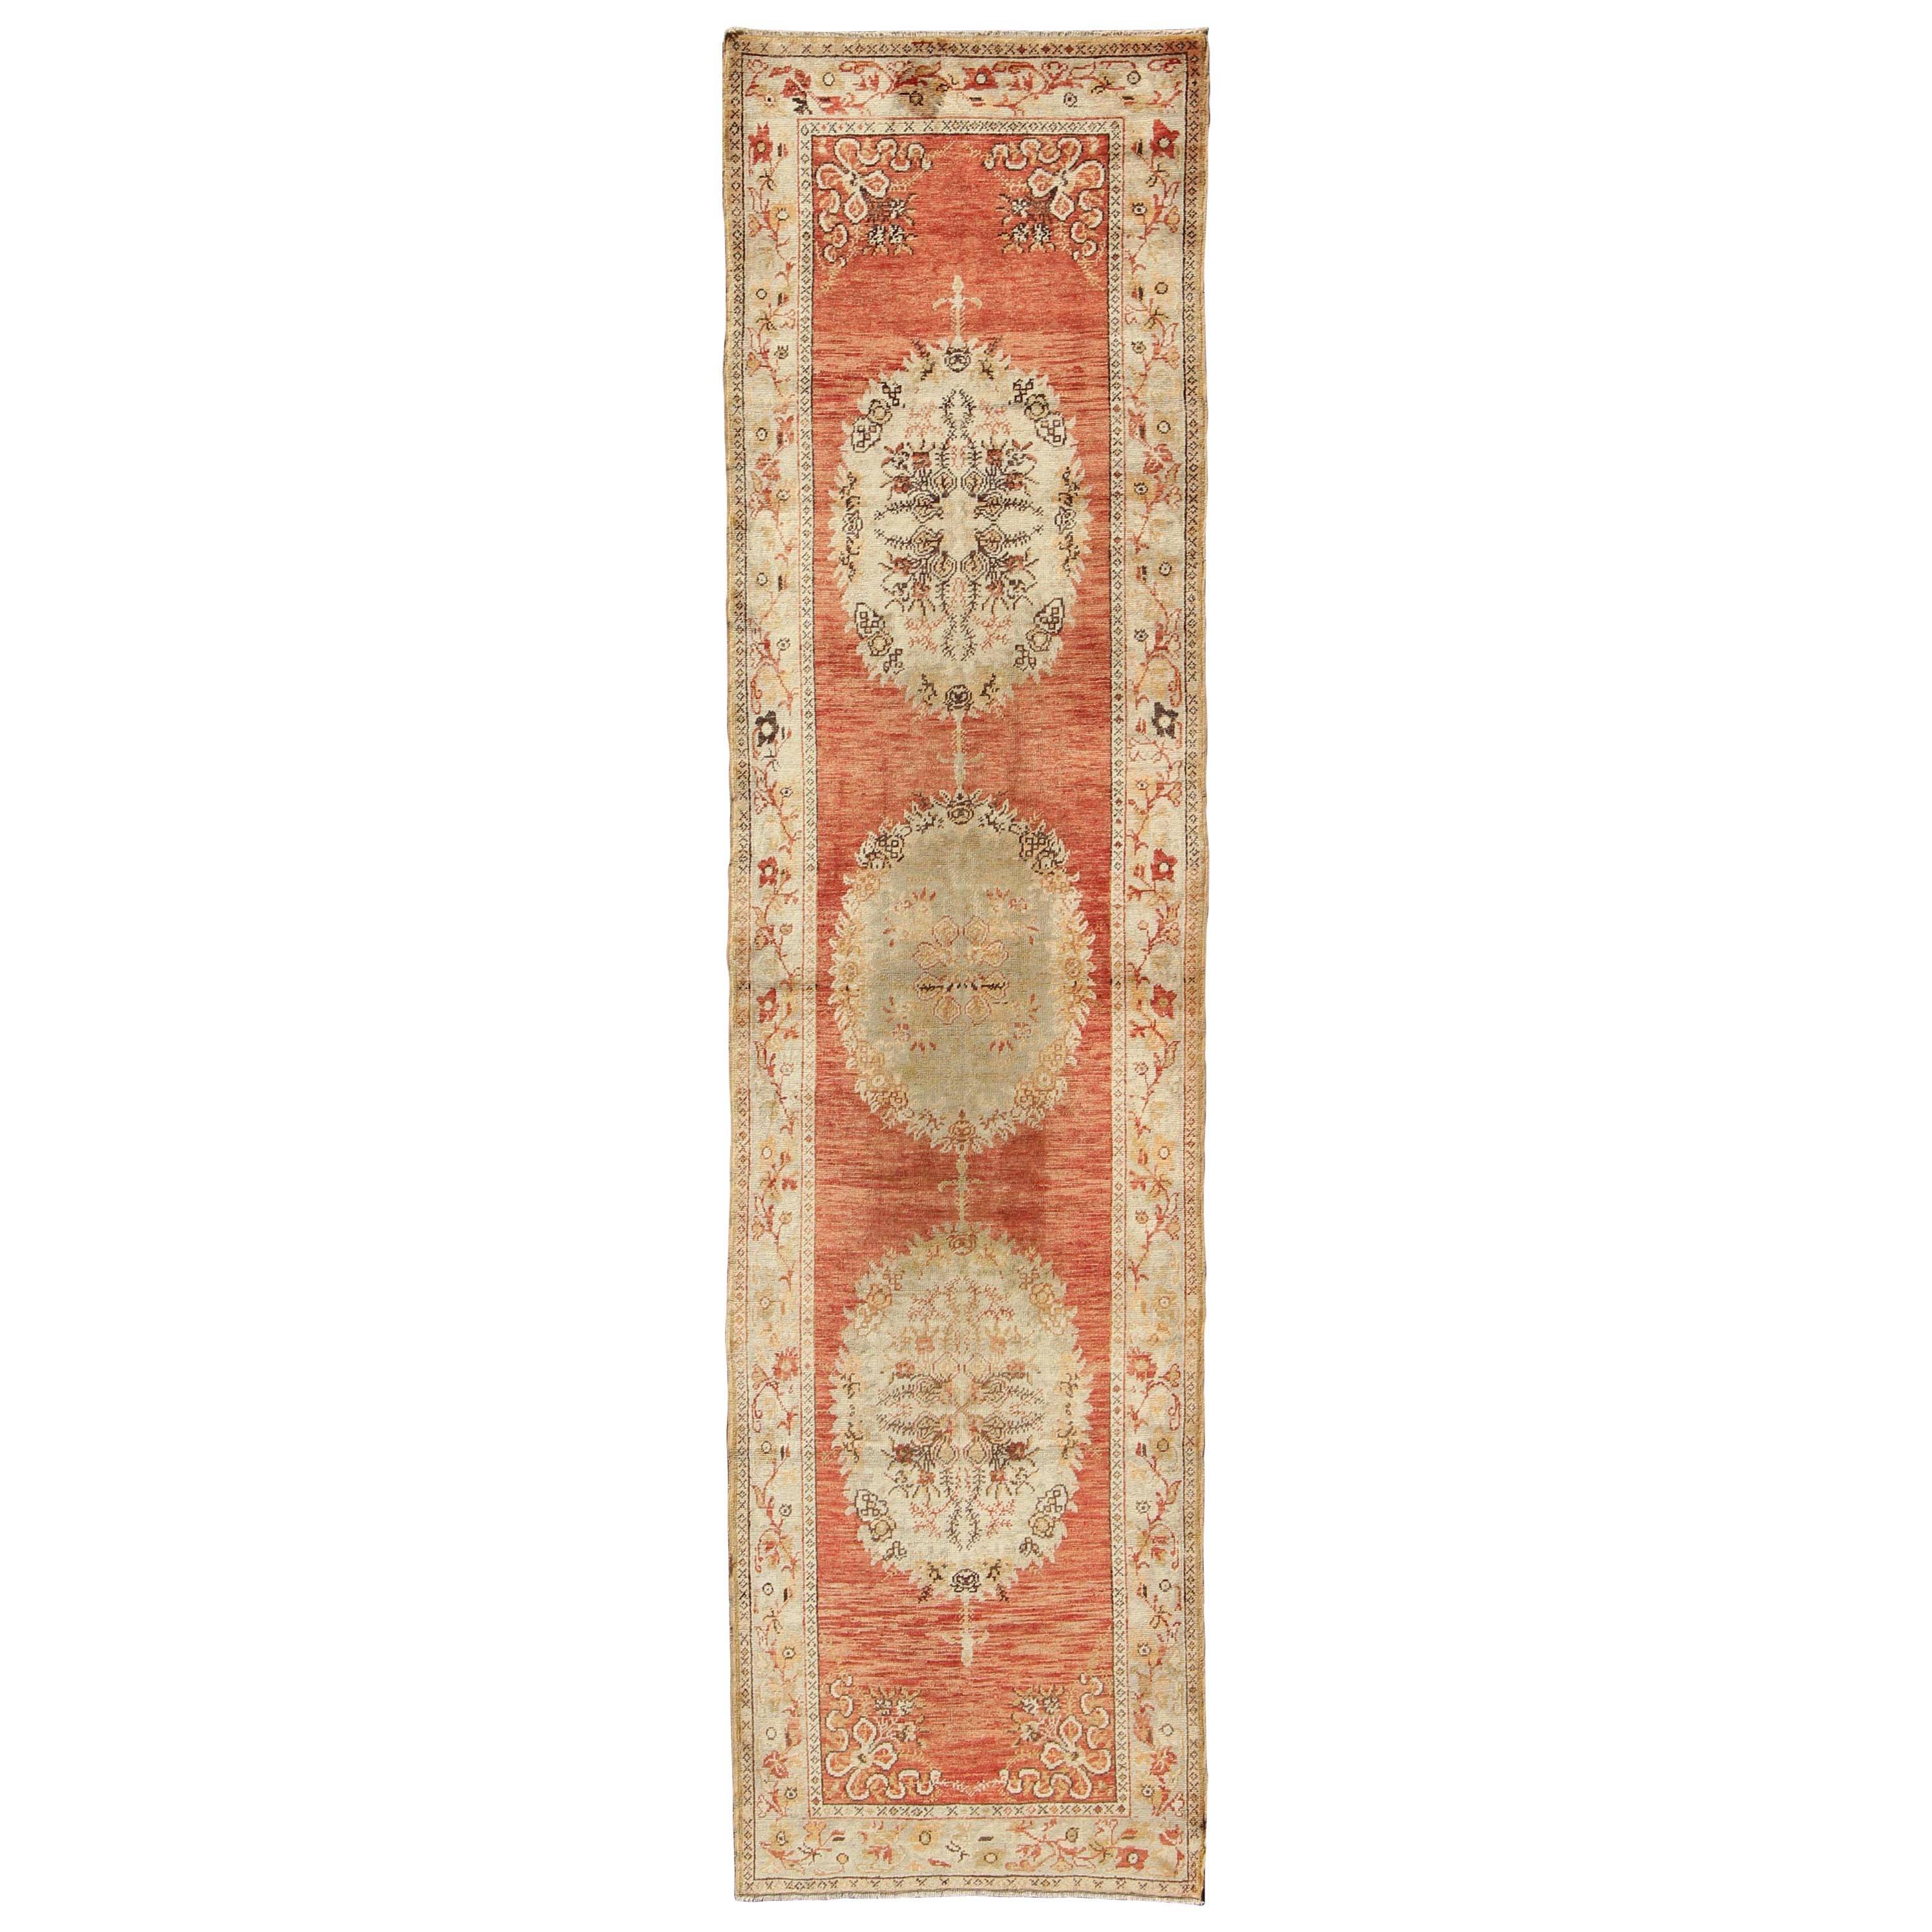 Oushak Runner With Floral Medallions in Soft Orange Red, Olive Green & Ivory